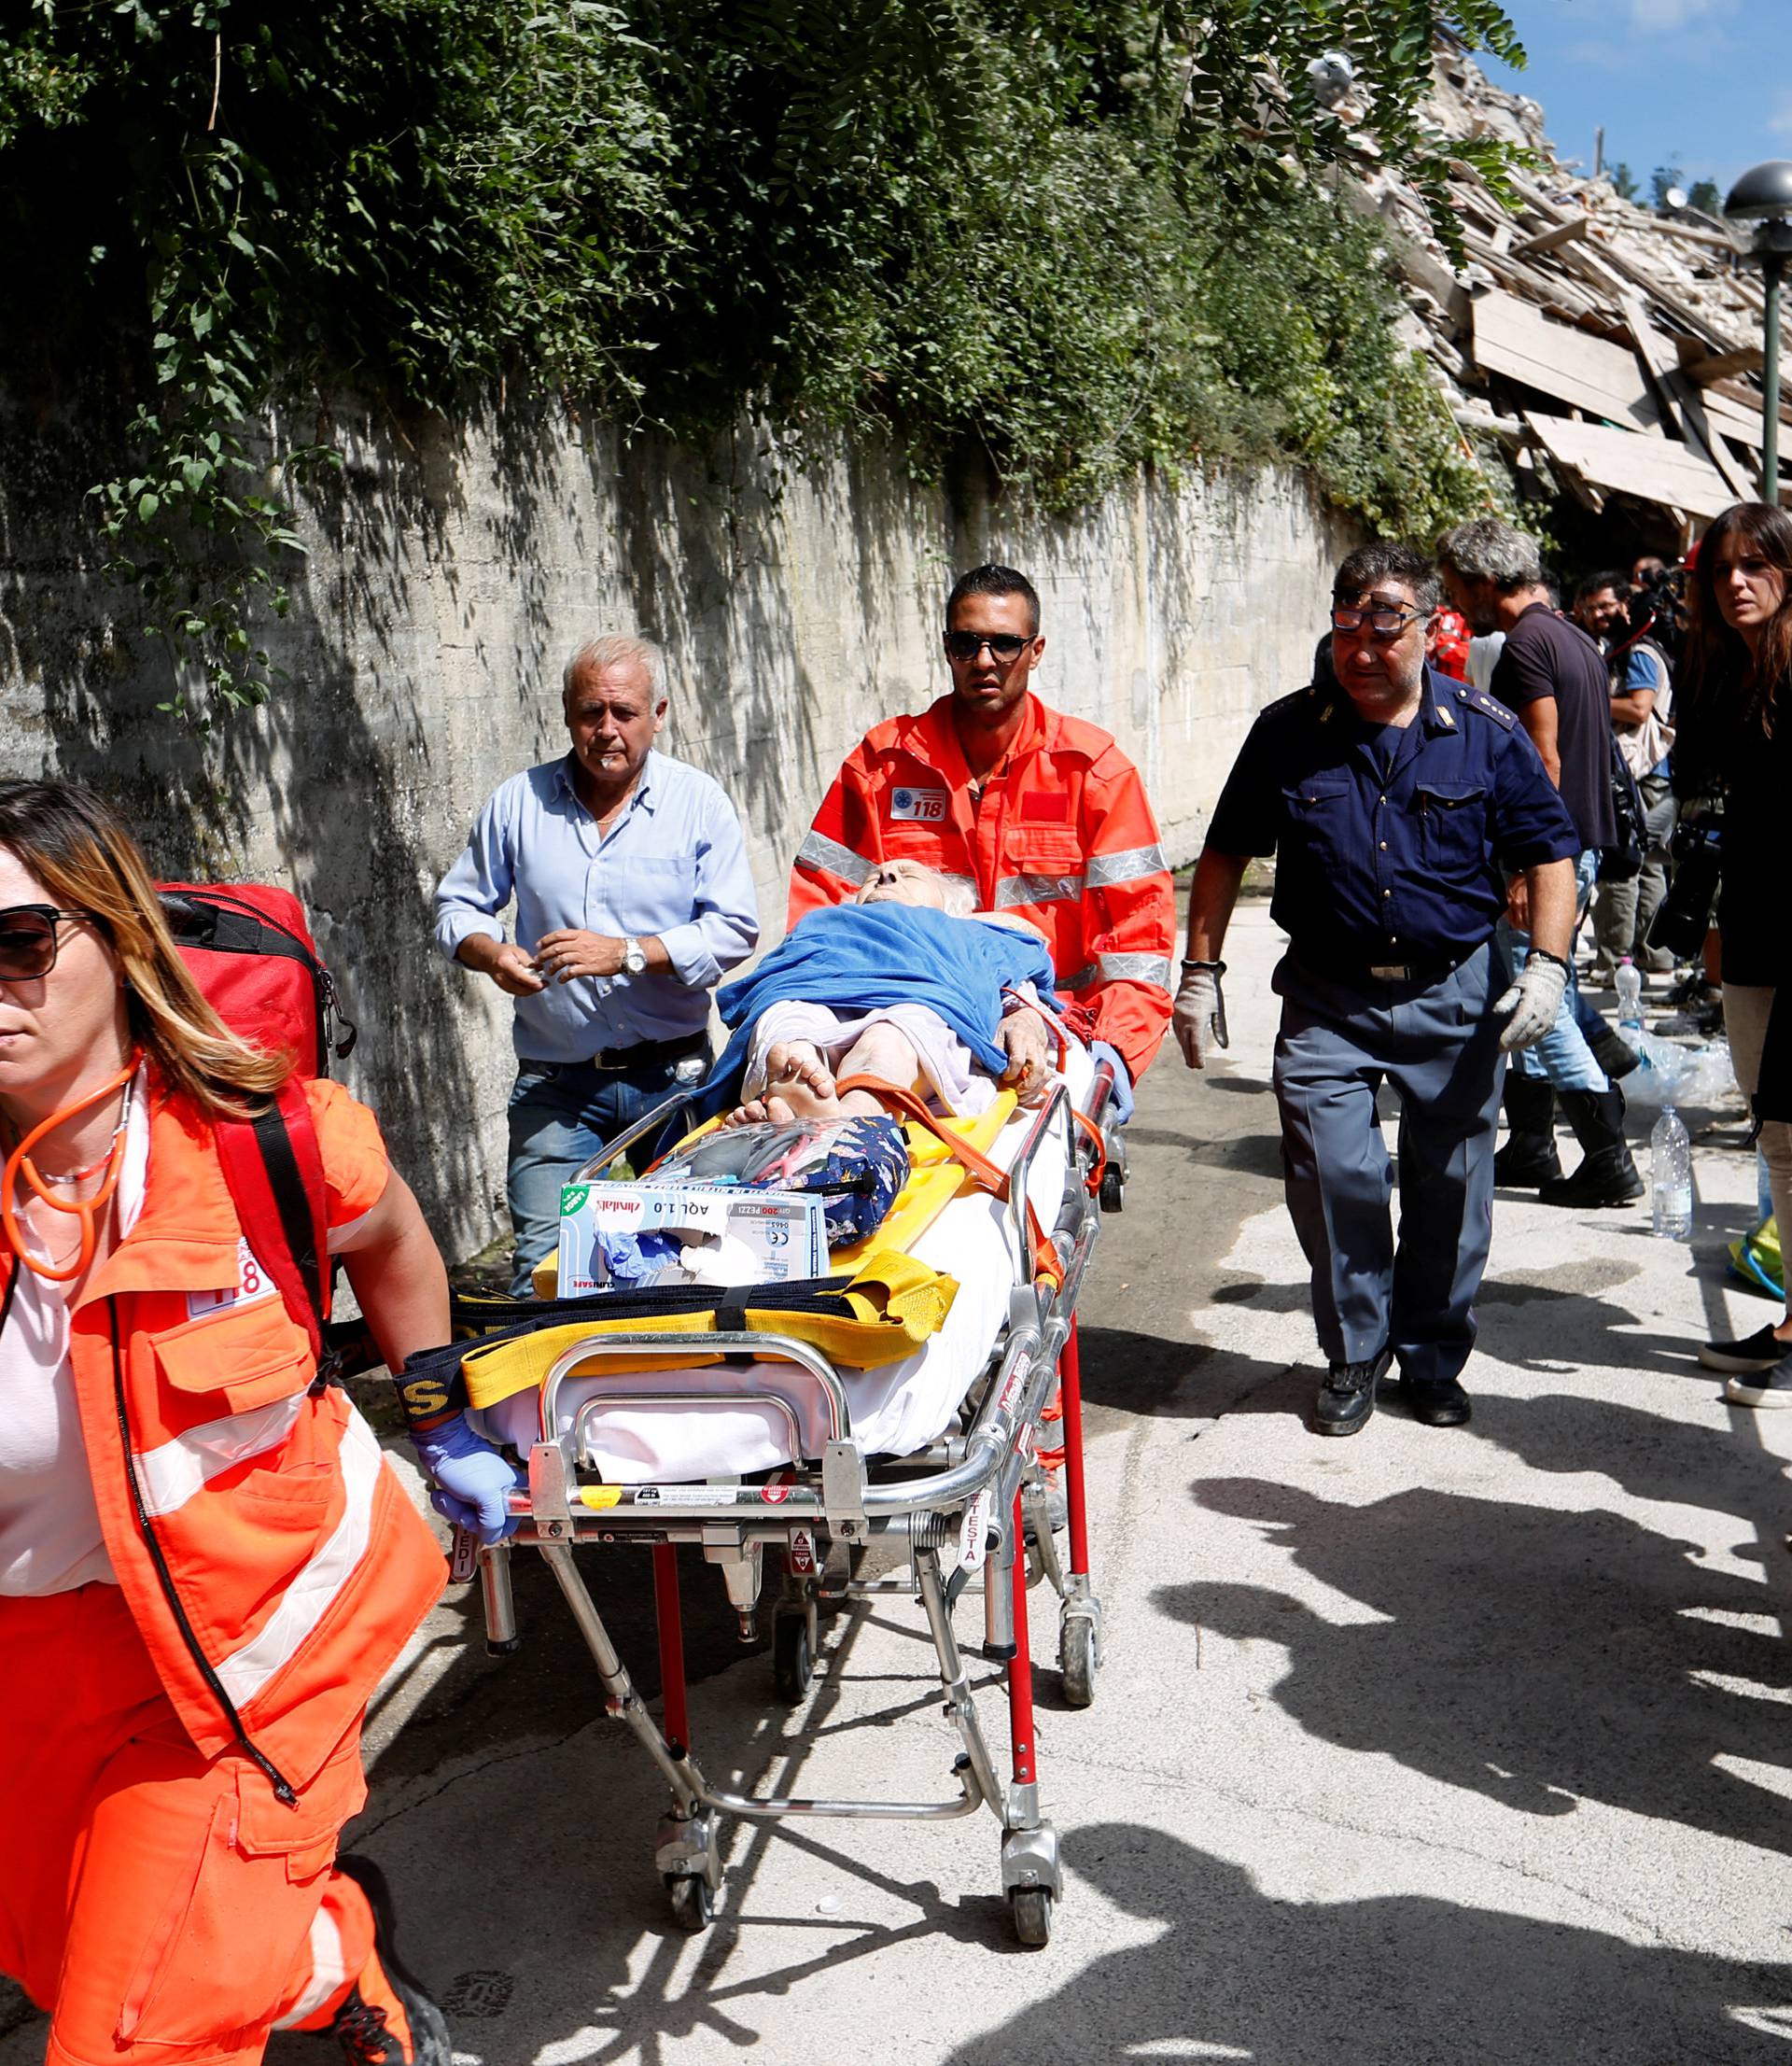 An injured person is carried away on a stretcher following an earthquake at Pescara del Tronto